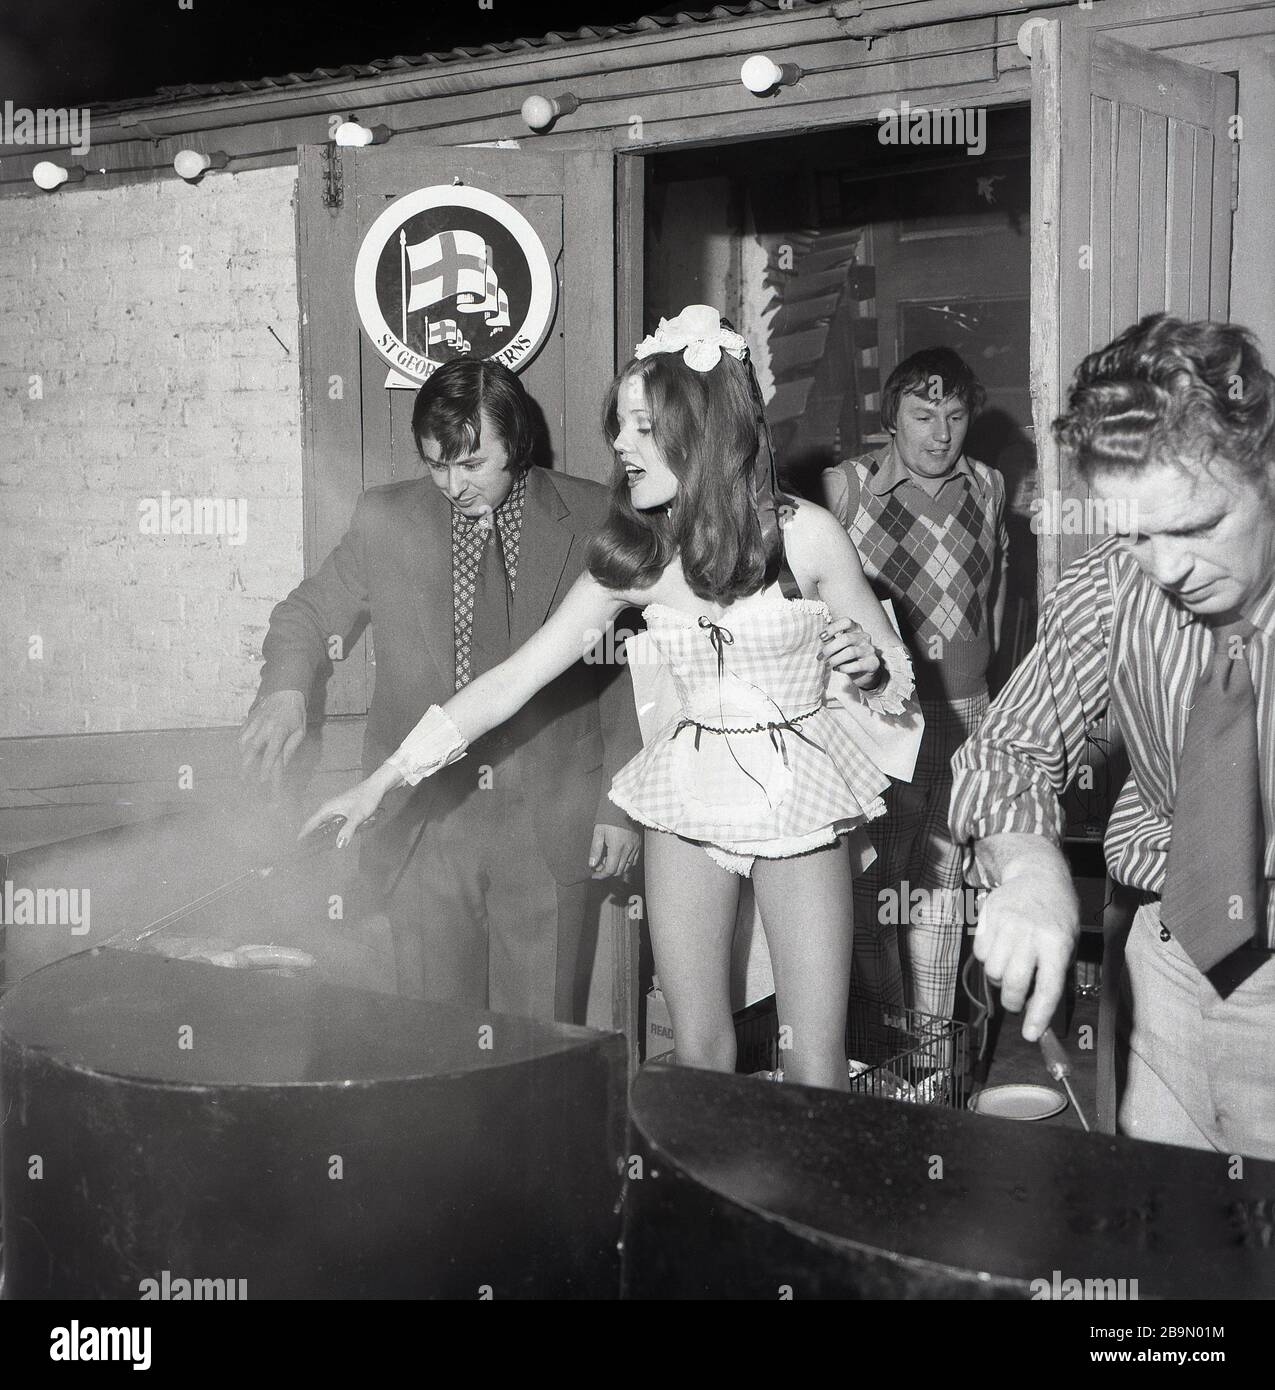 1973, historical, attractive young lady wearing a very short and revealing party frock helping with the cooking outside on a grill at a fund raising barbeque at The Lord Northbrook pub, Lee, South East London, England. At the corner of southbrook Rd, the pub is named after Lord Northbrook, whose family is Baring, the banking family who in the 19th century had an estate in the borough. Stock Photo